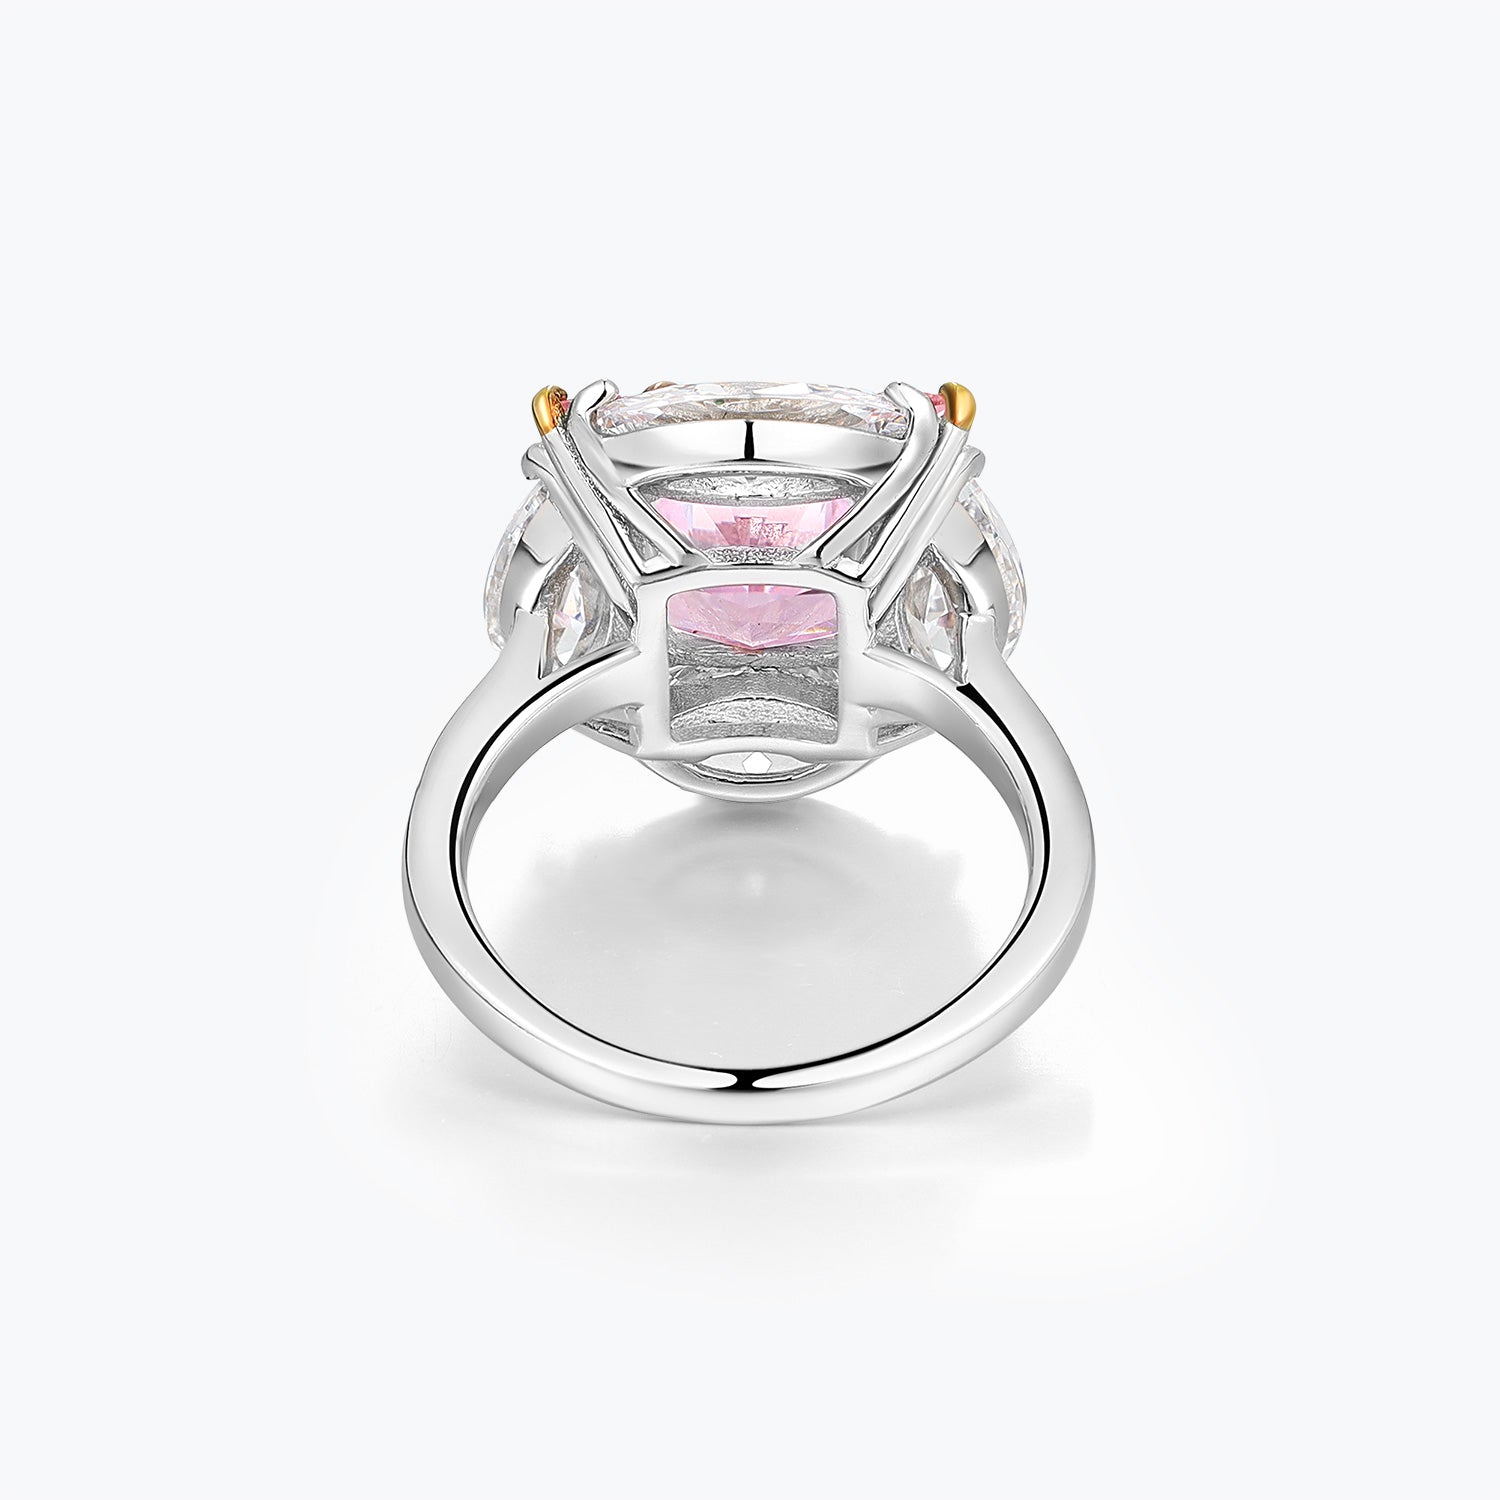 Pink & White Multi-Stone Cluster Oblong Cocktail Ring - dissoojewelry